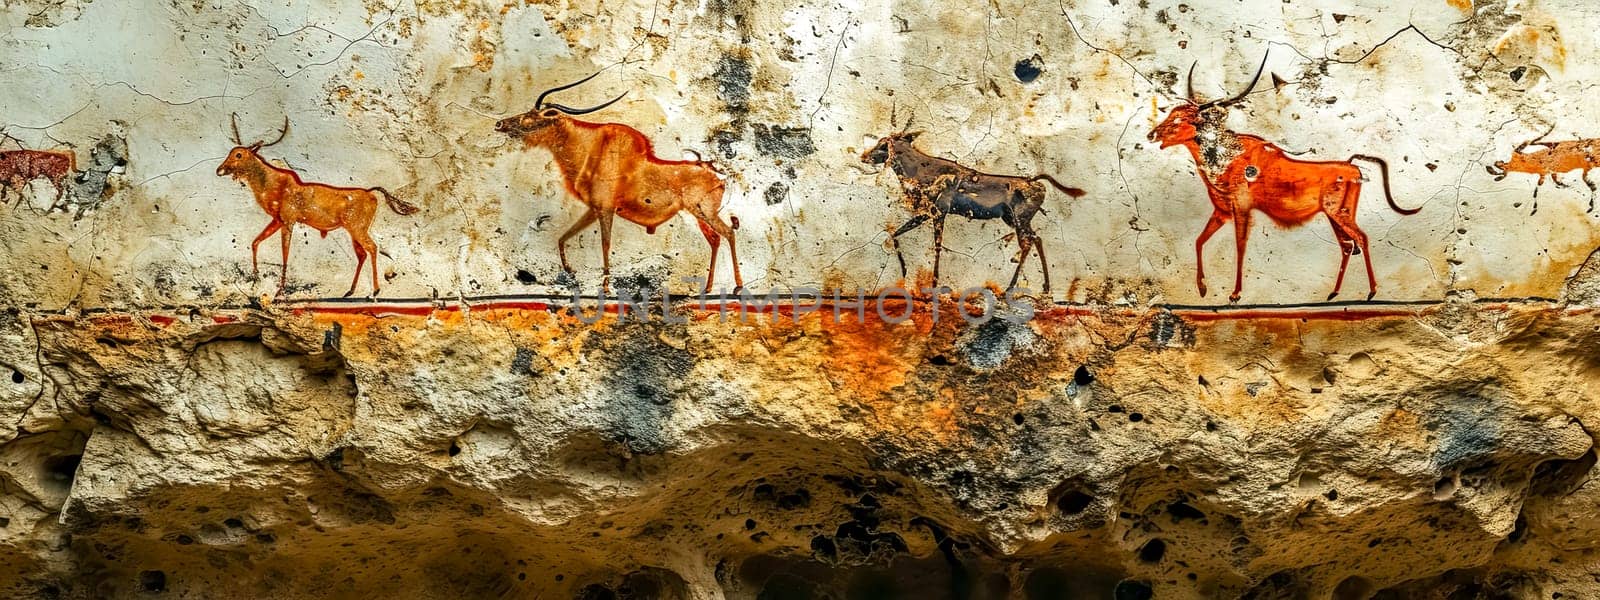 ancient-style cave paintings depicting a series of animals, possibly telling a story or representing a hunting scene, rendered on a textured wall. by Edophoto